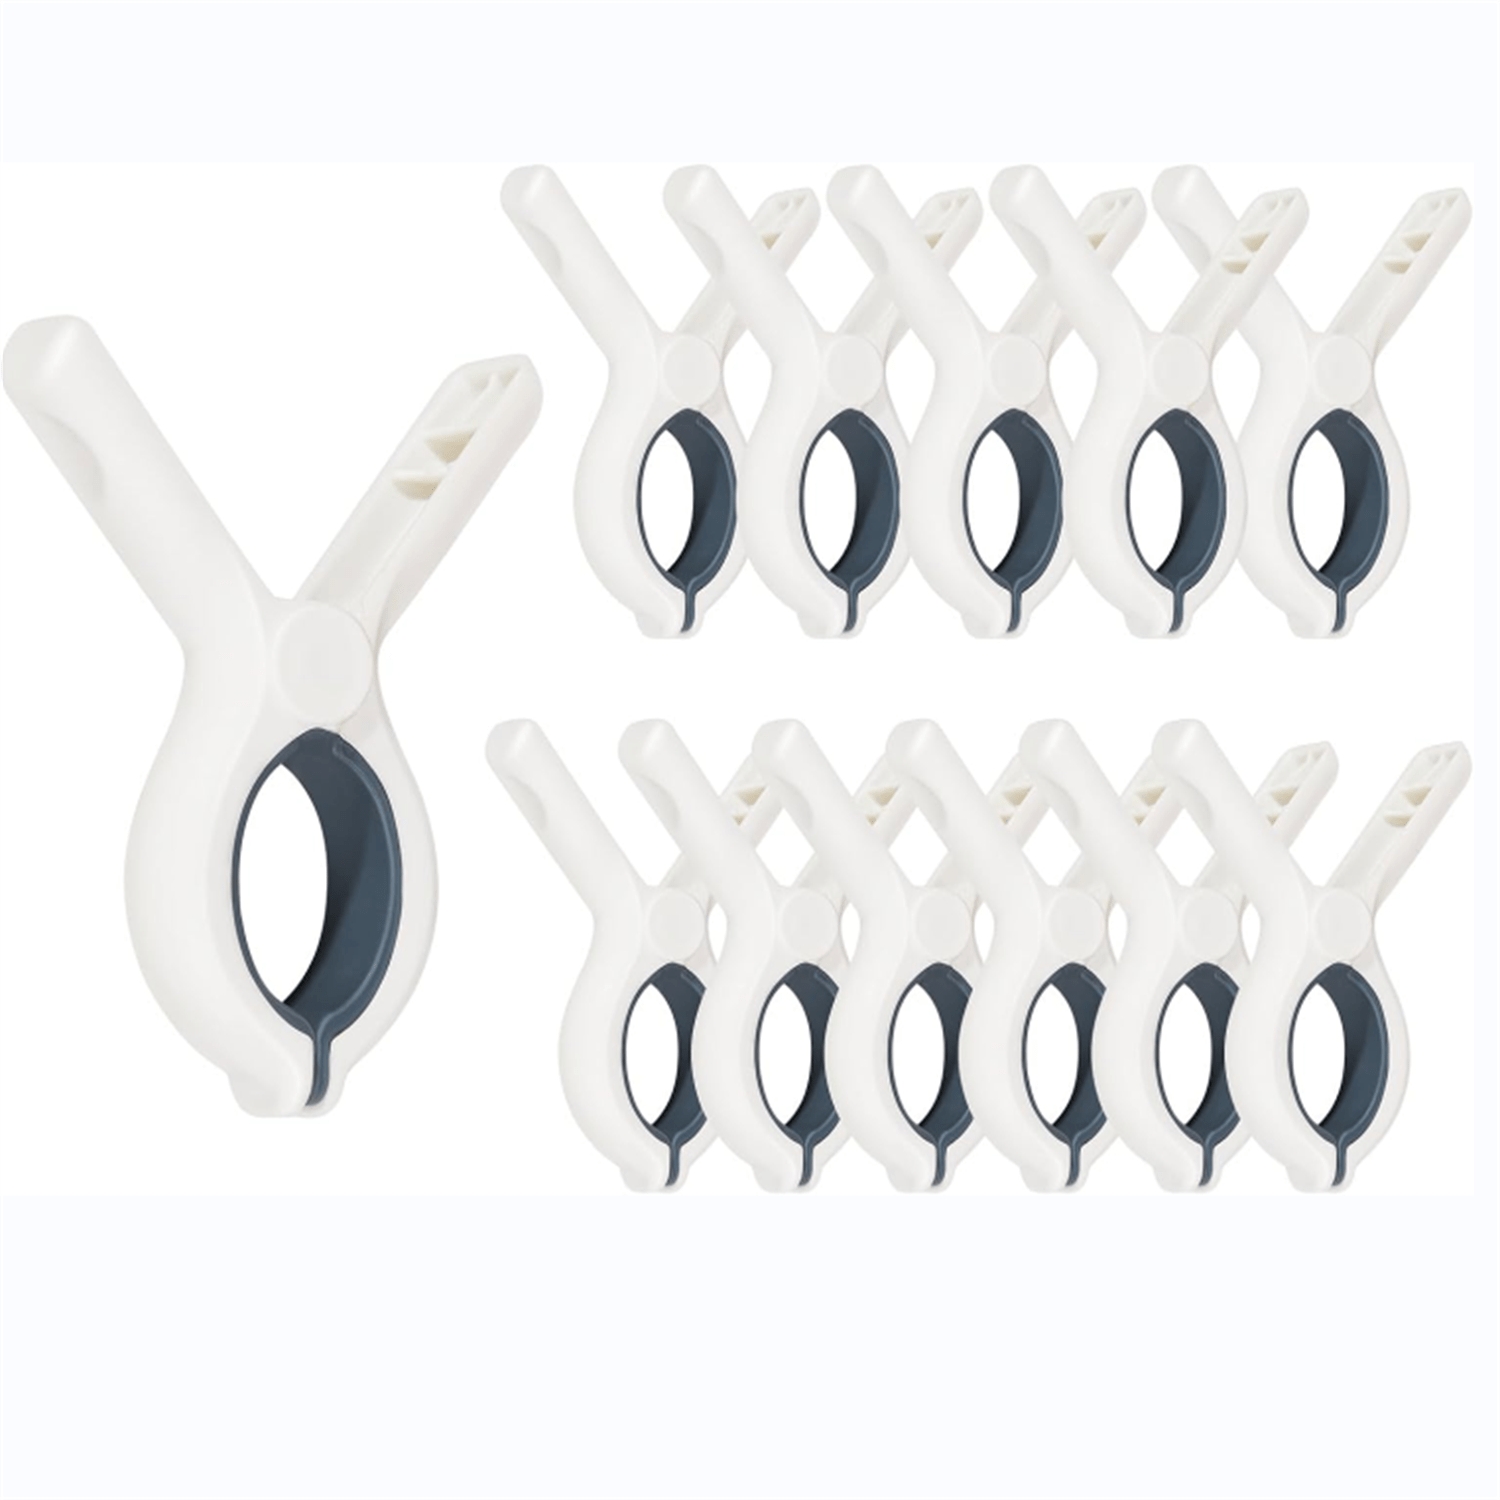 

12pcs/pack Beach Towel Clips, Heavy-duty Plastic Clothes Pins, Quilt Drying Clips, Windproof Clothes Clips, Keep Your Towel, Clothes, Blankets To Dry On Clothesline And Hanging Rack